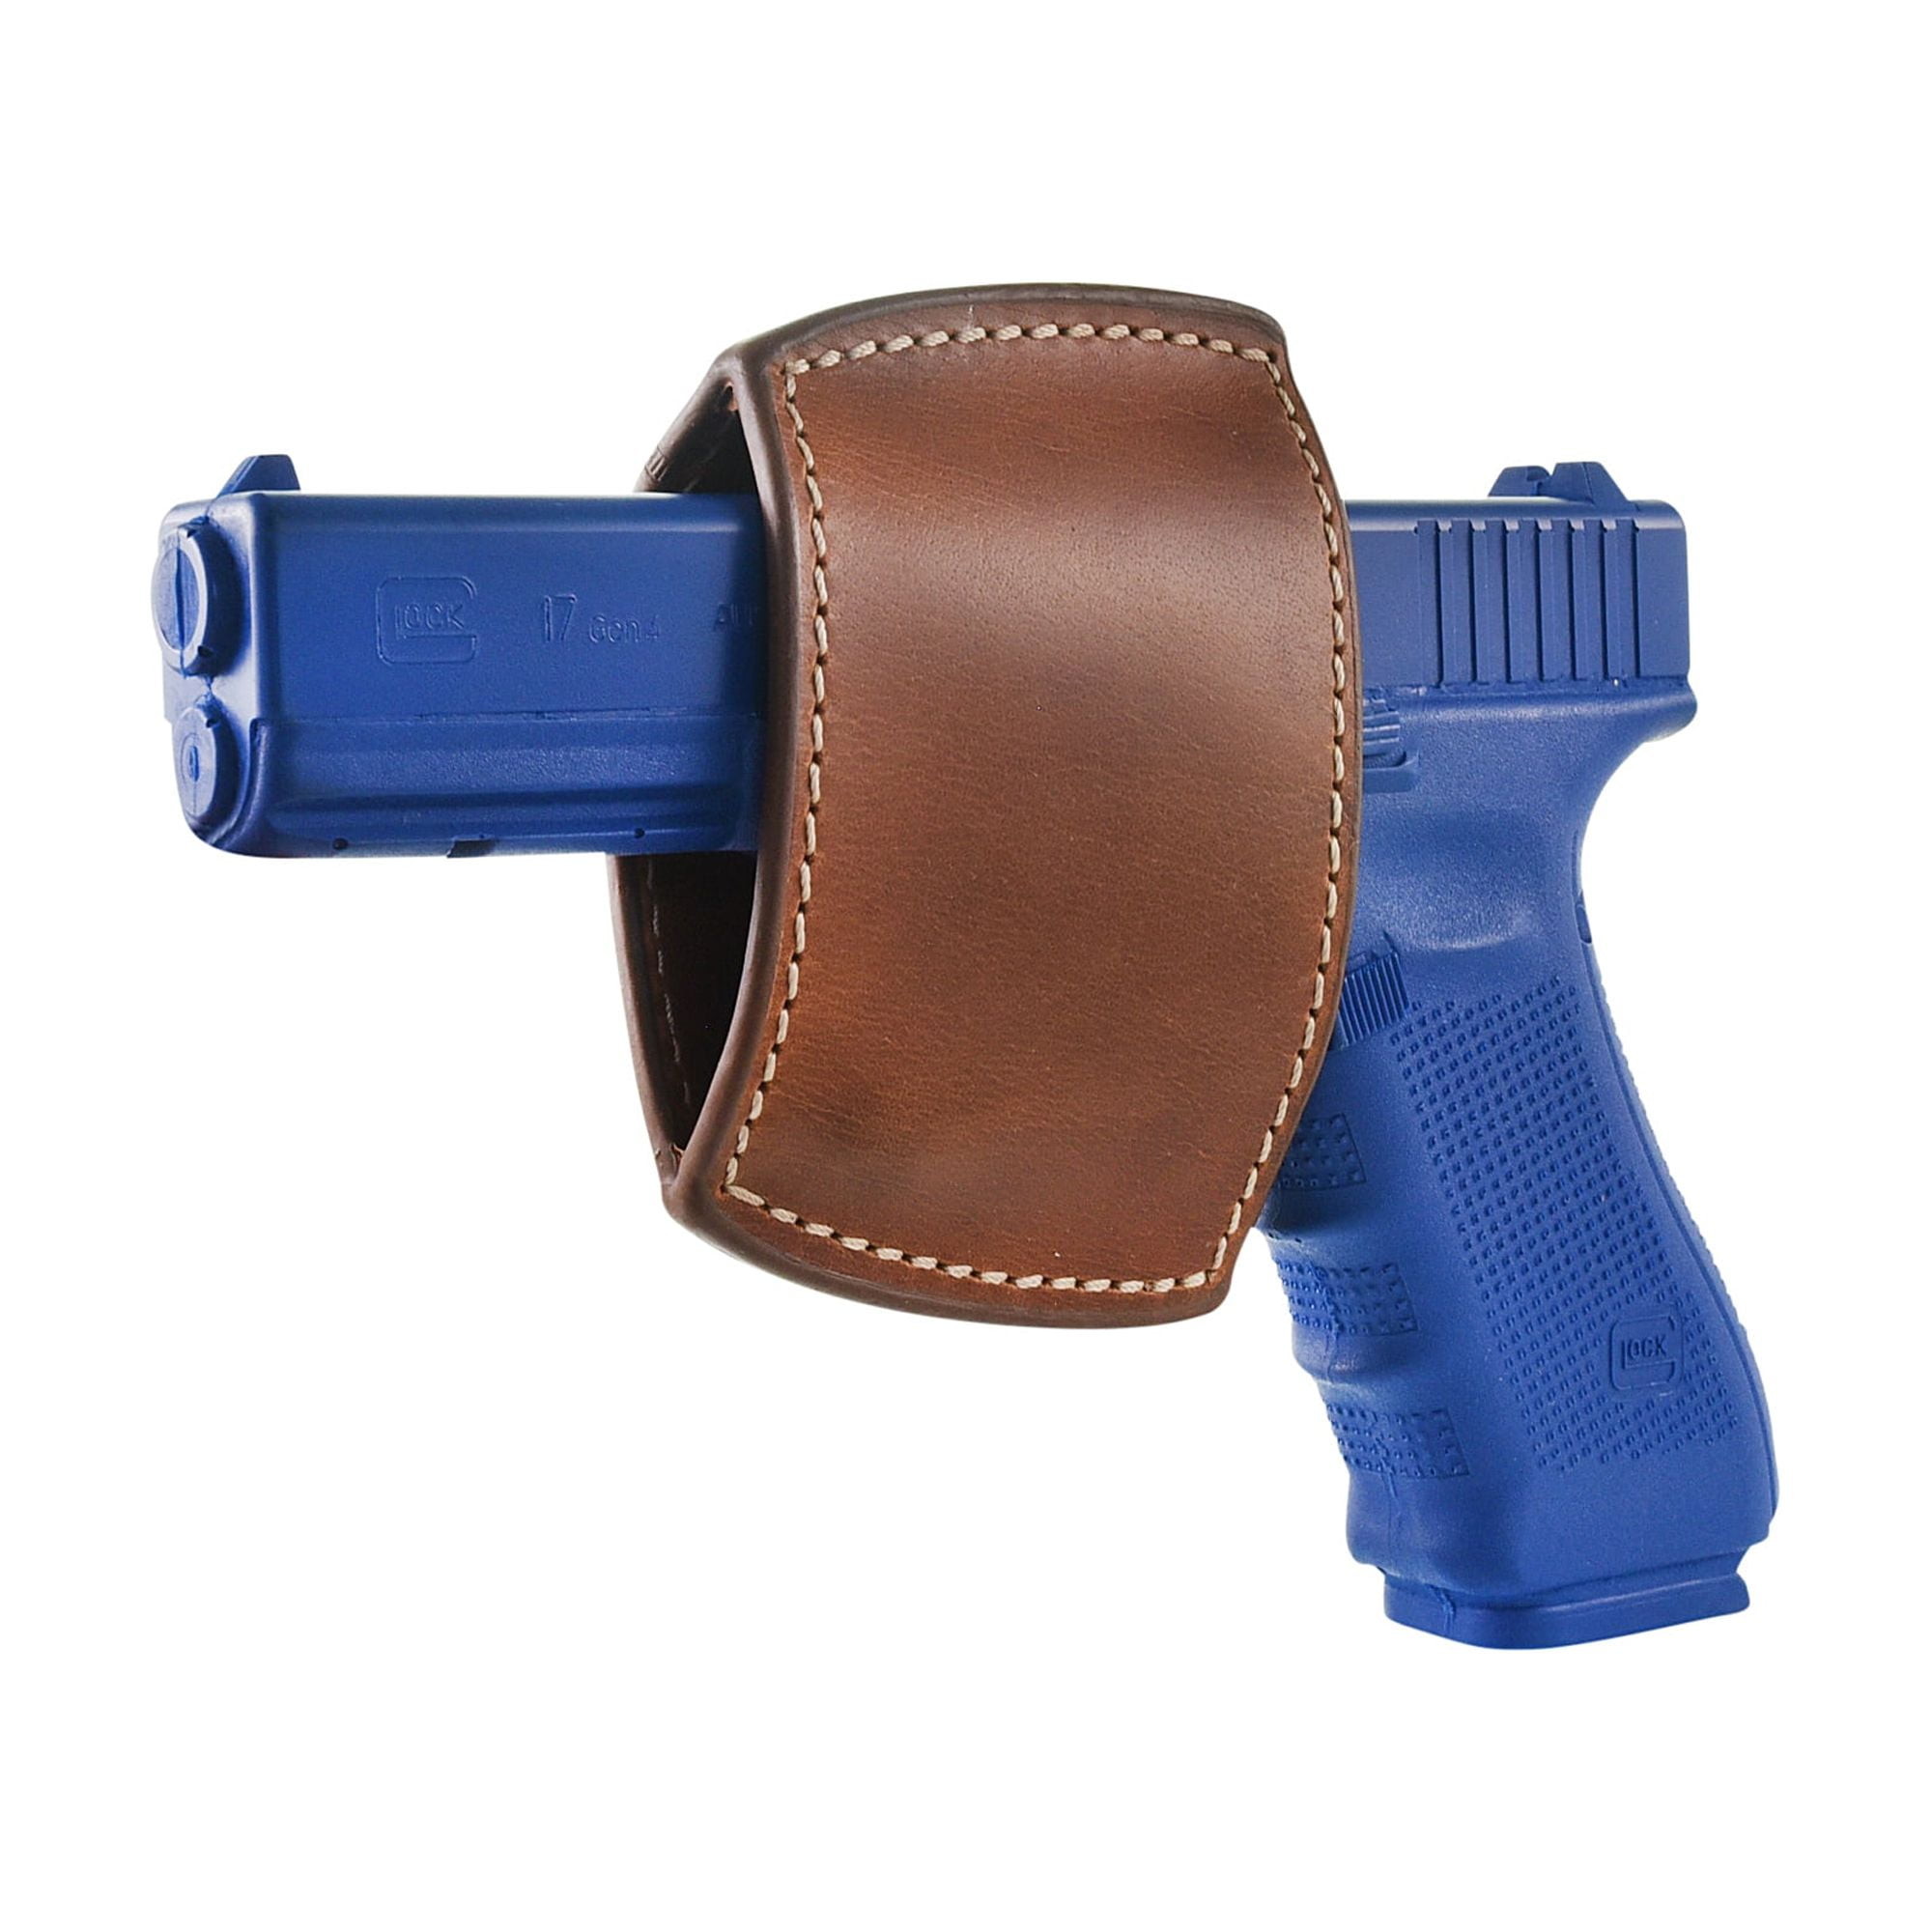 Saddle Mate Leather Universal Gun Holster and Holder, Brown